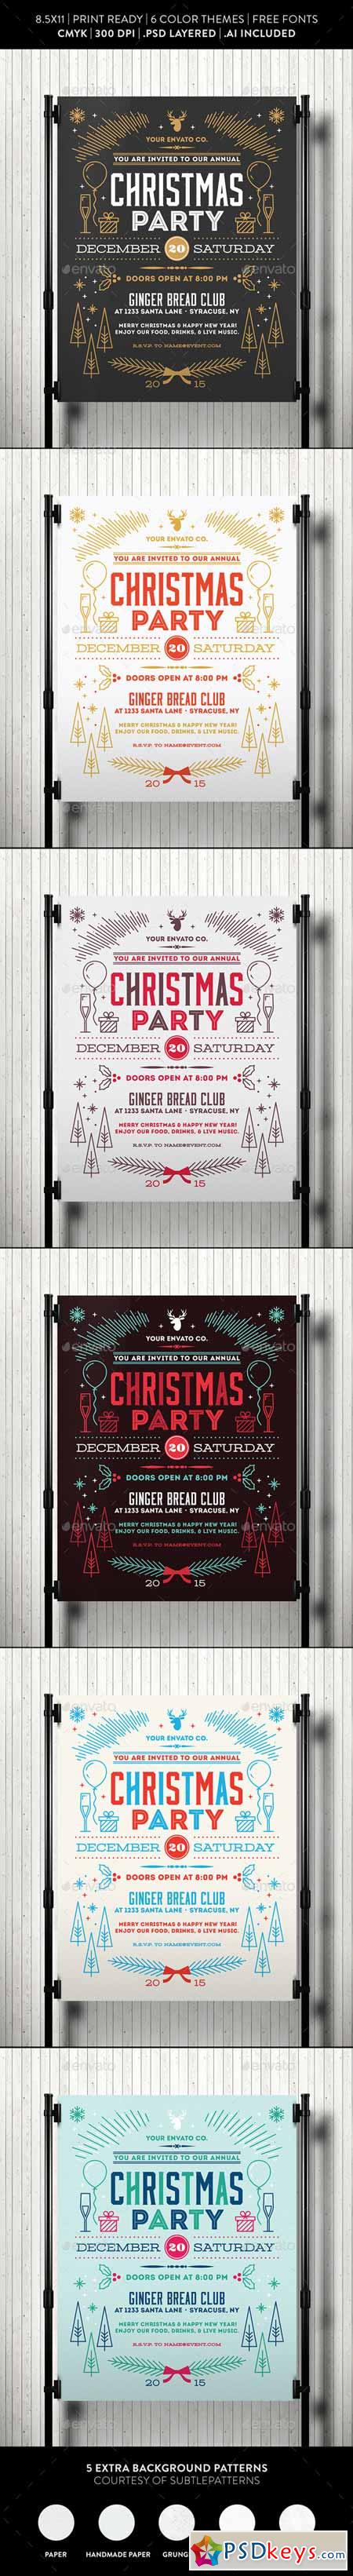 Christmas Party Flyer Template 9485861